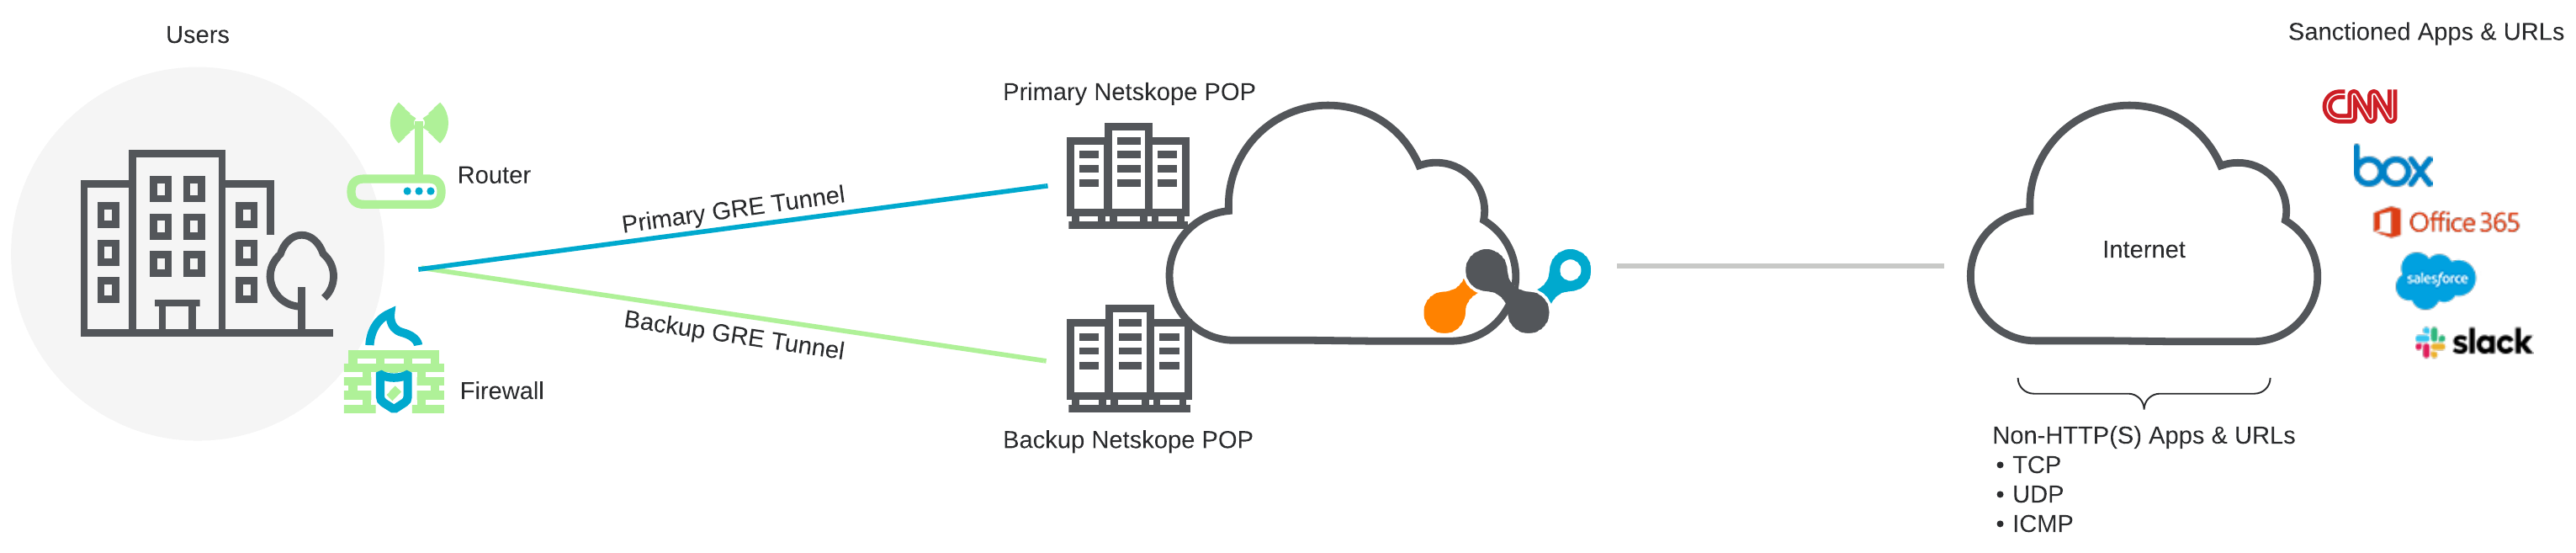 A network diagram showing the traffic workflow for GRE Tunnels with Netskope Secure Web Gateway and Cloud Firewall.